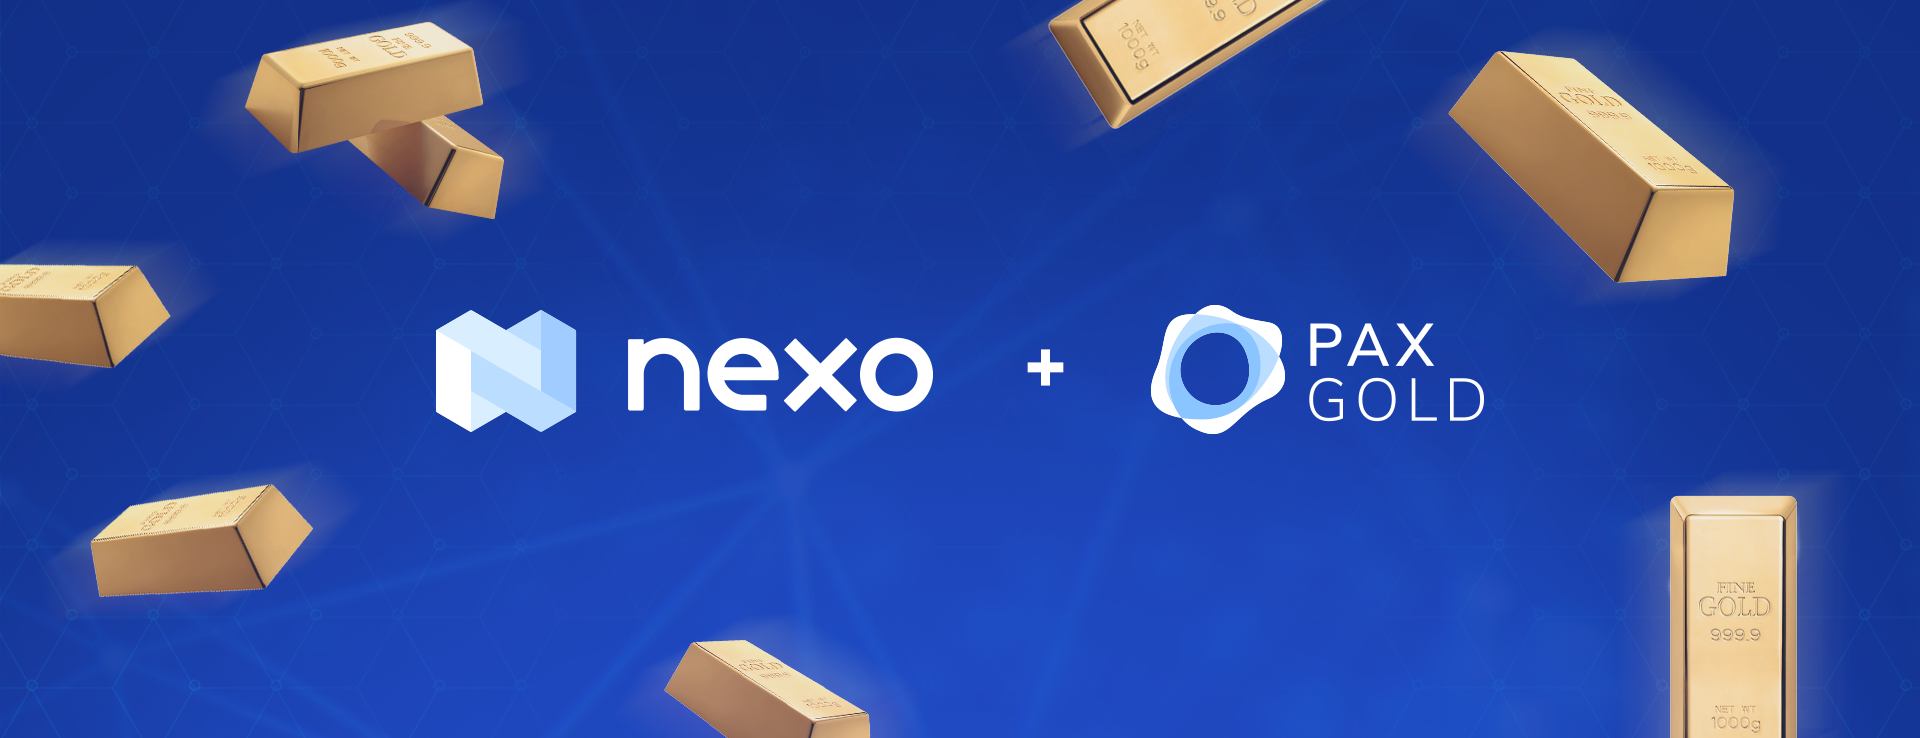 Nexo Now Accepts Tokenized Gold for Instant Credit Lines and Will Offer Interest-Bearing Accounts on Gold